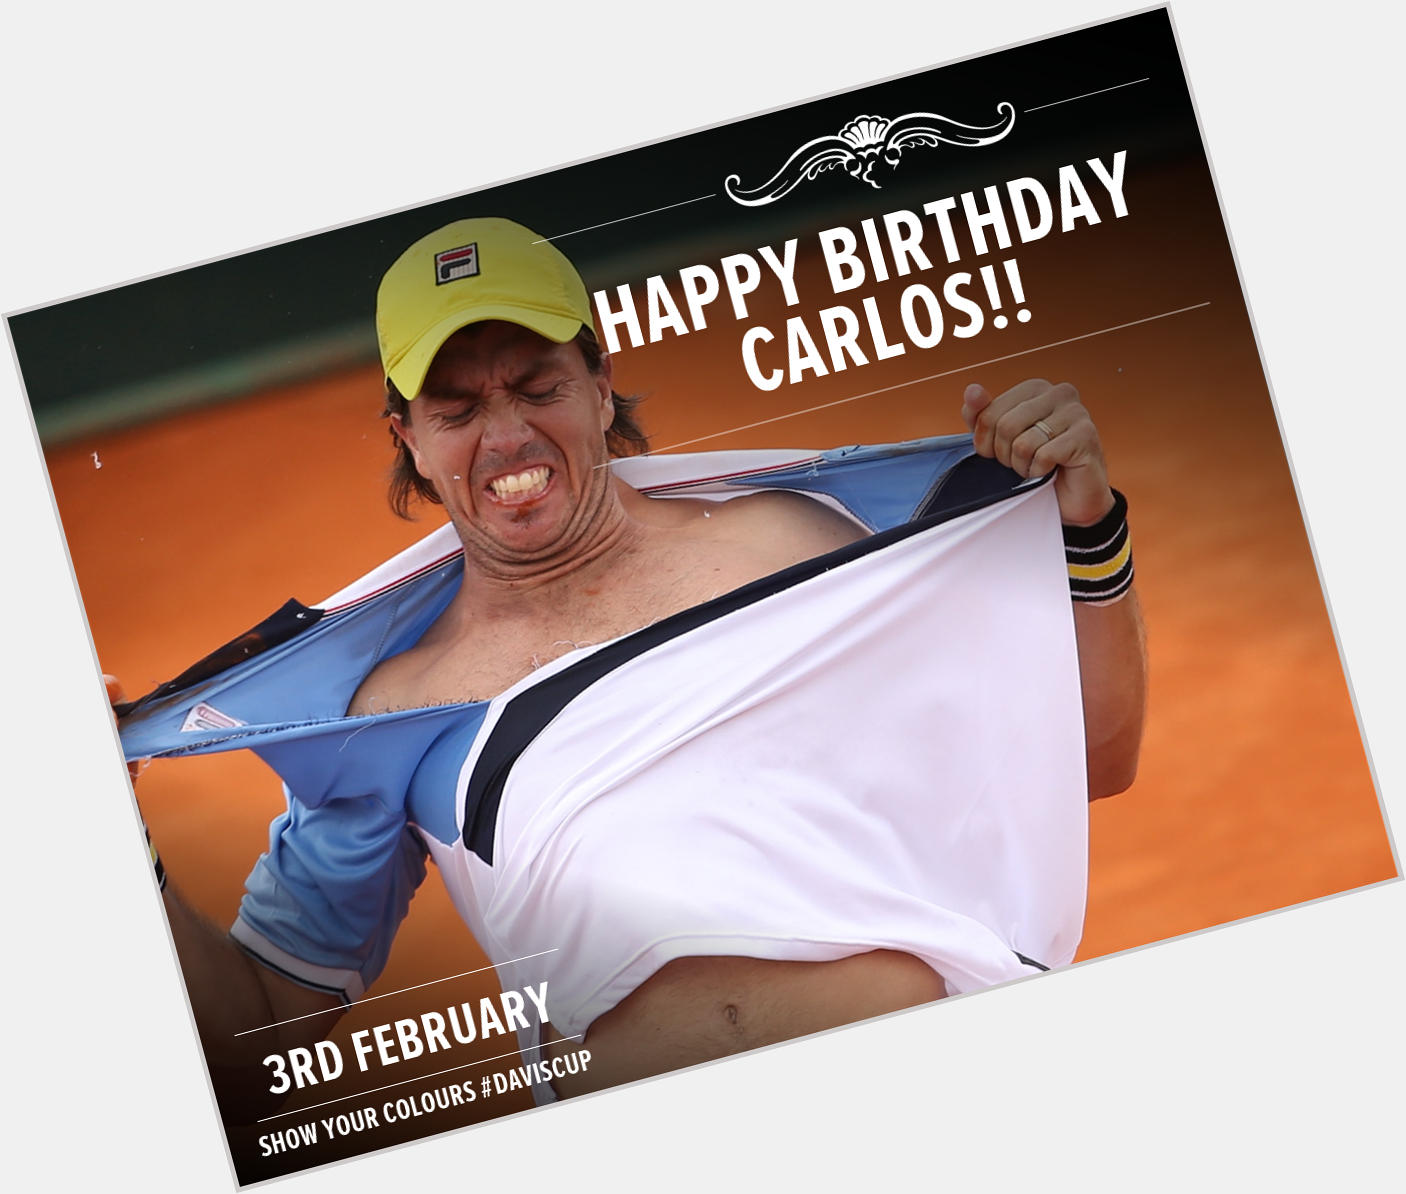 Via: DavisCup: Happy Birthday to charlyberlocq who is in action right now against Andreas 